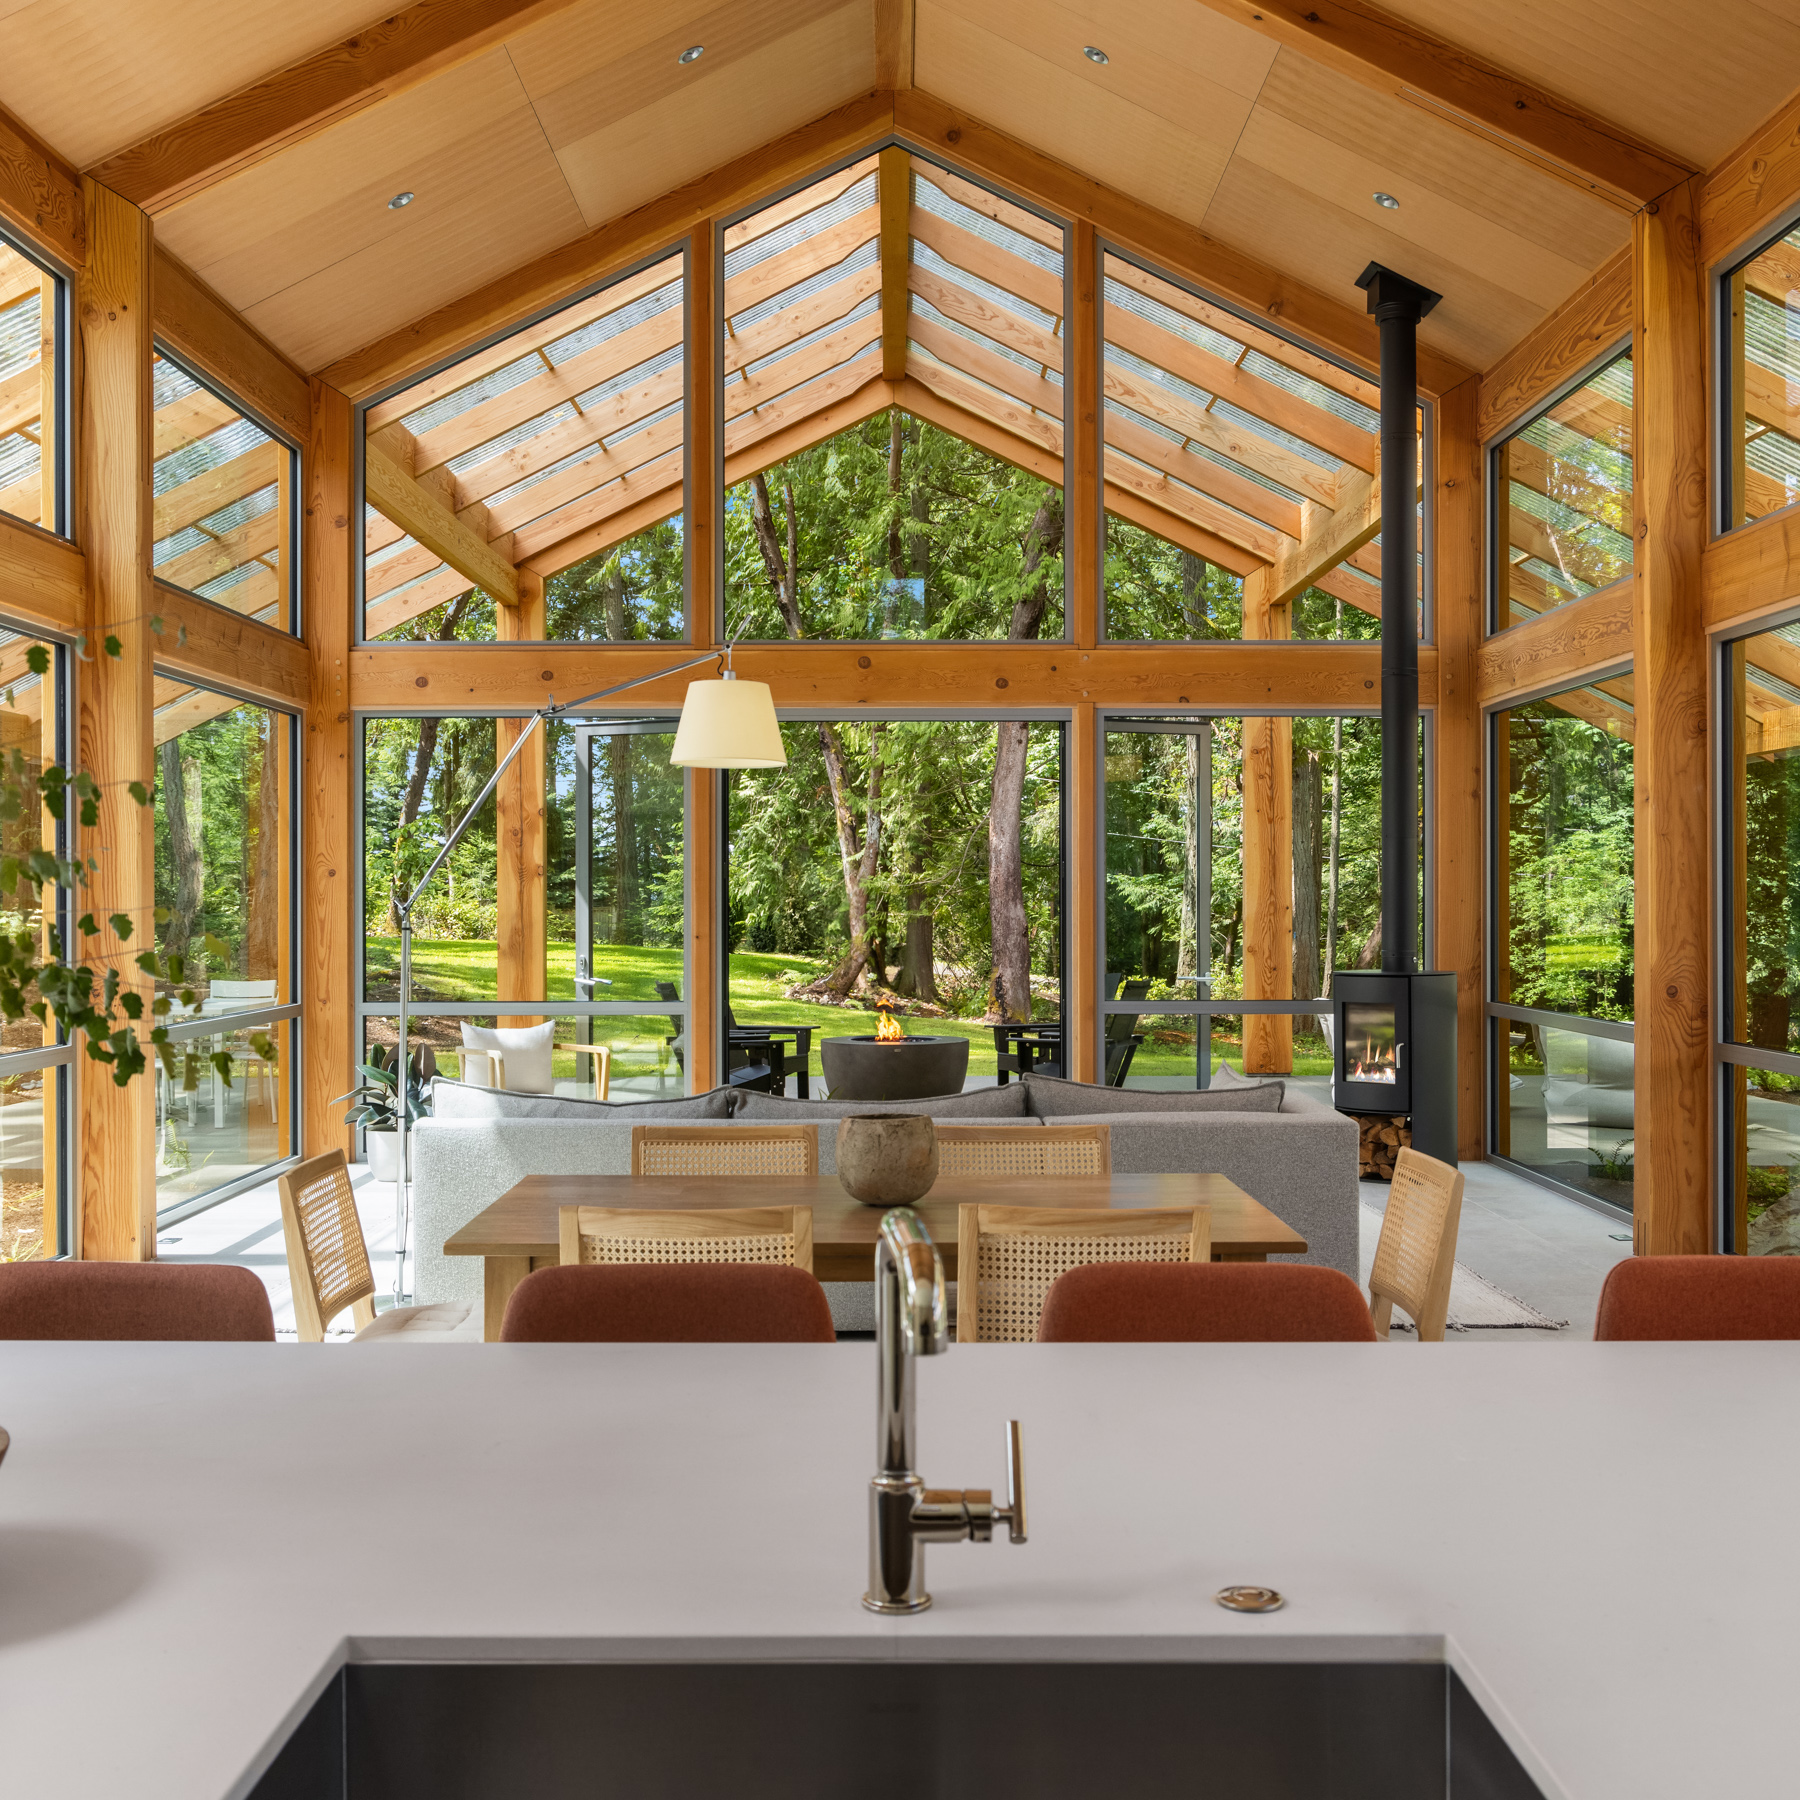 New Energy Works Timber Frame Home in Oregon